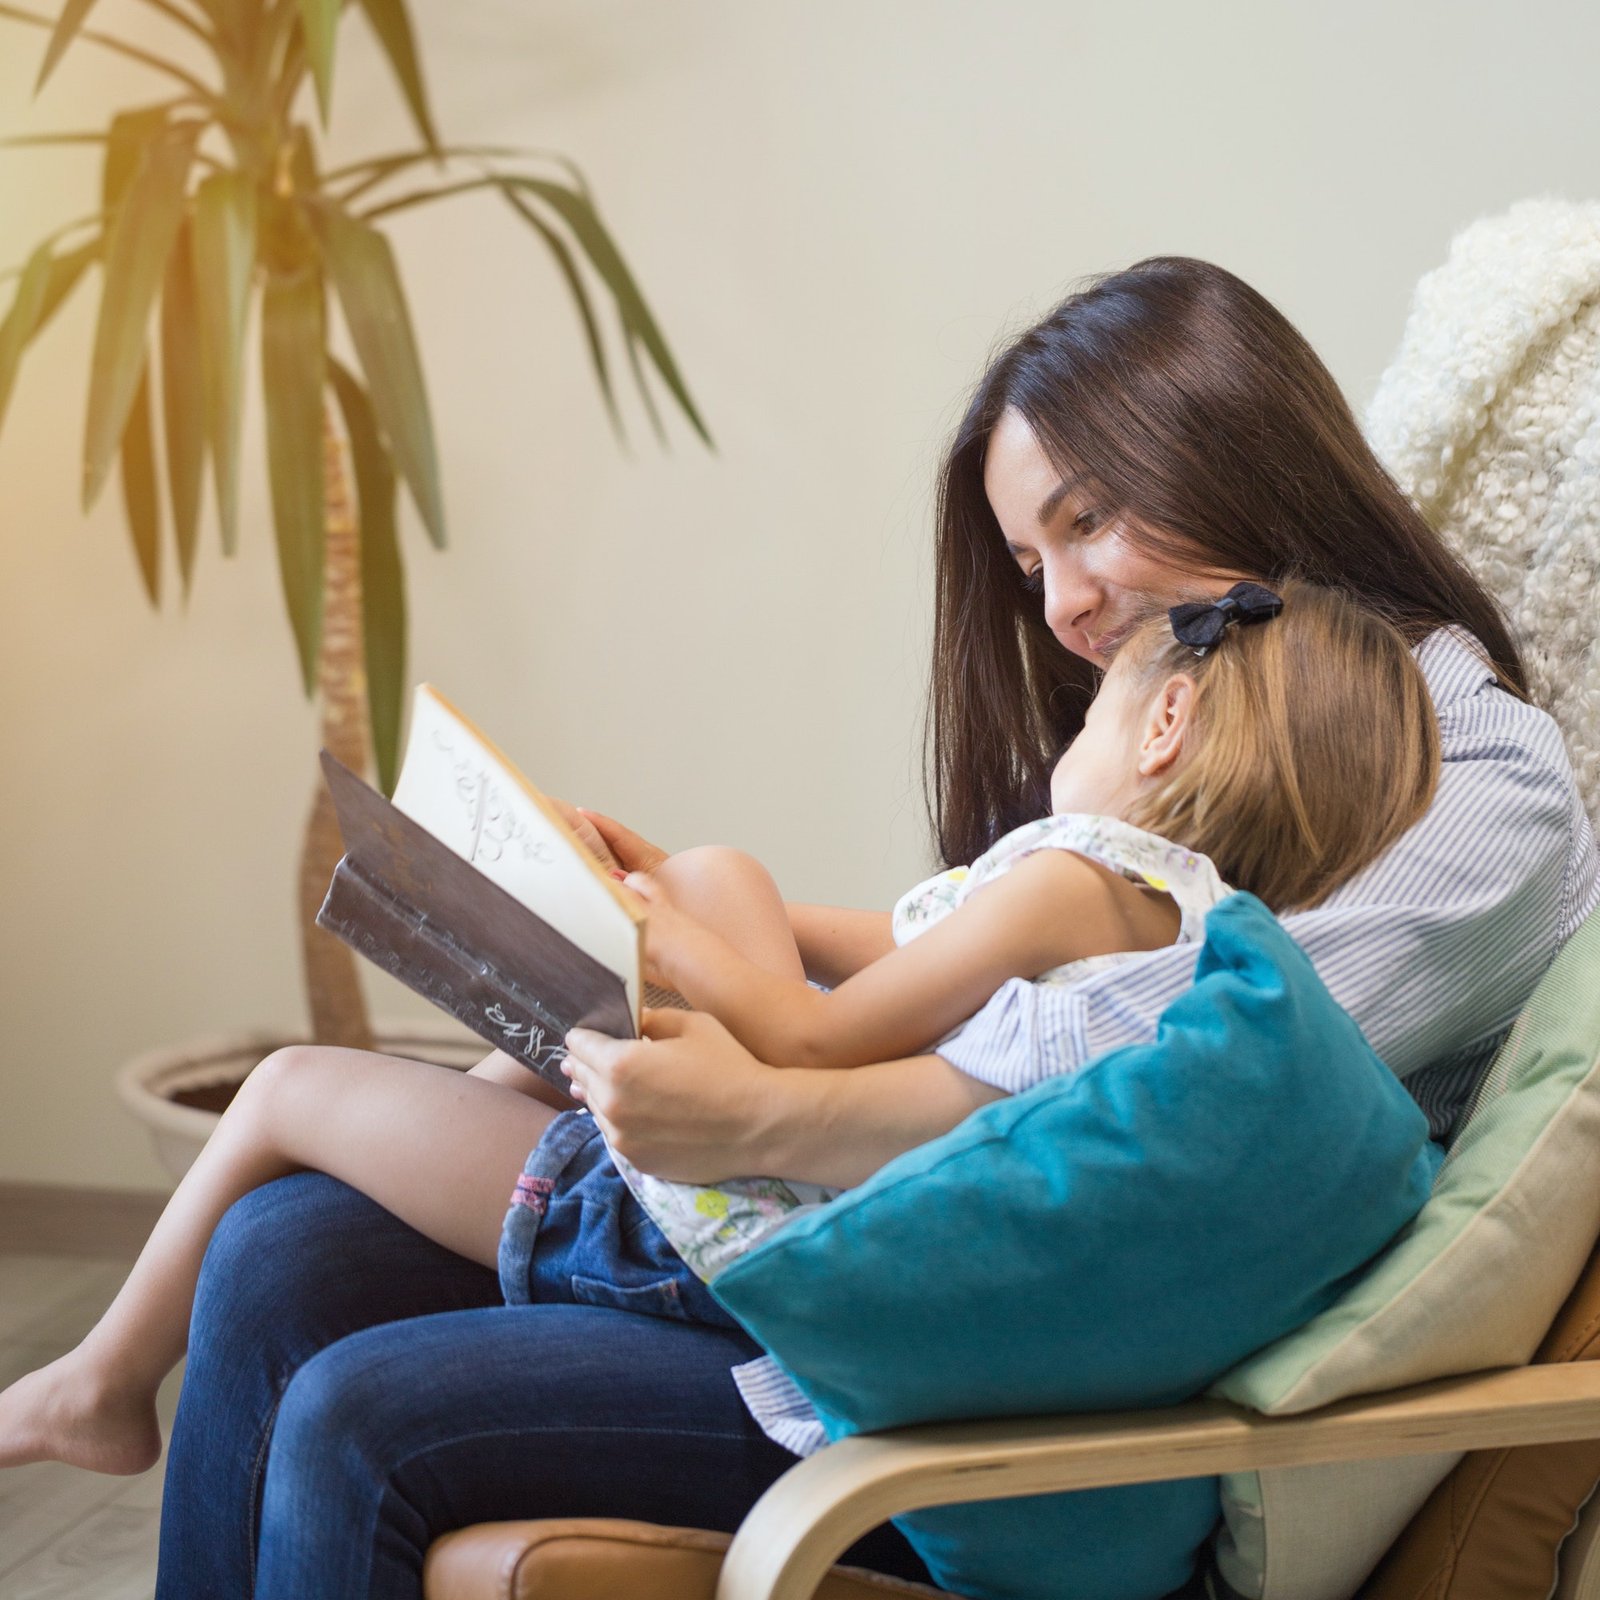 Mother with a little girl reading a book together in the house